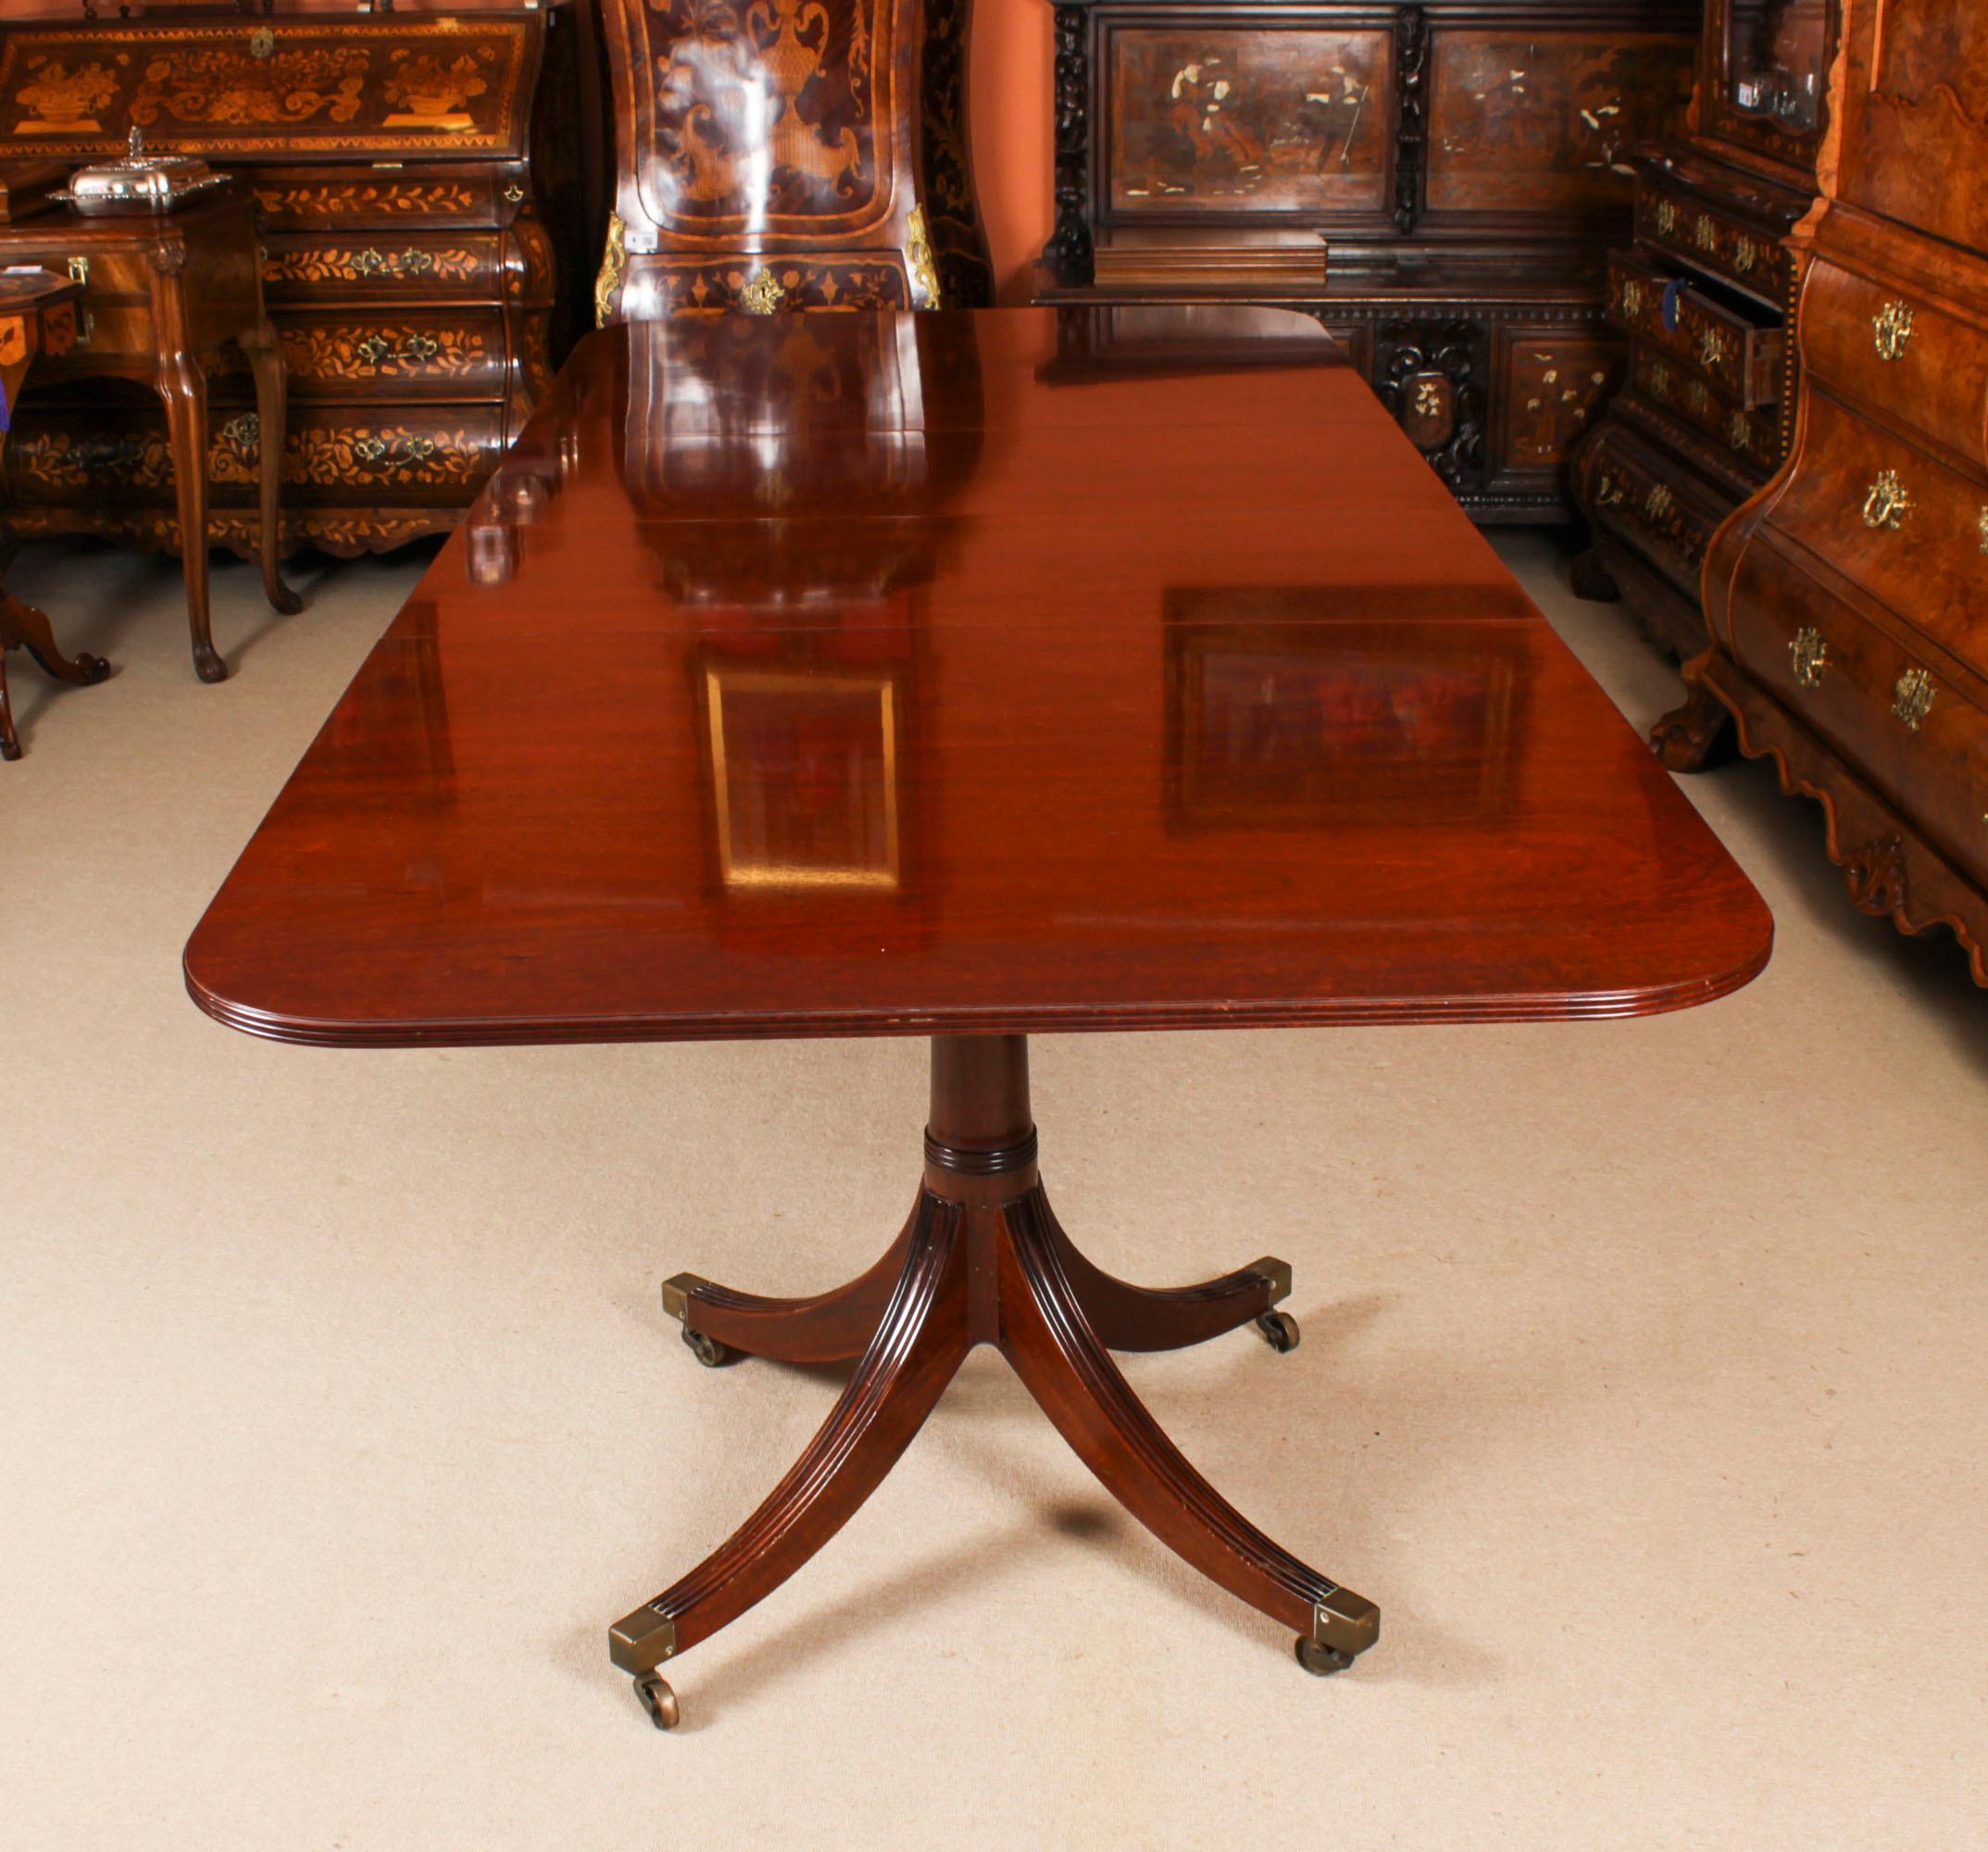 Late 20th Century Vintage Regency Revival Dining Table and 10 Chairs by William Tillman 20th C